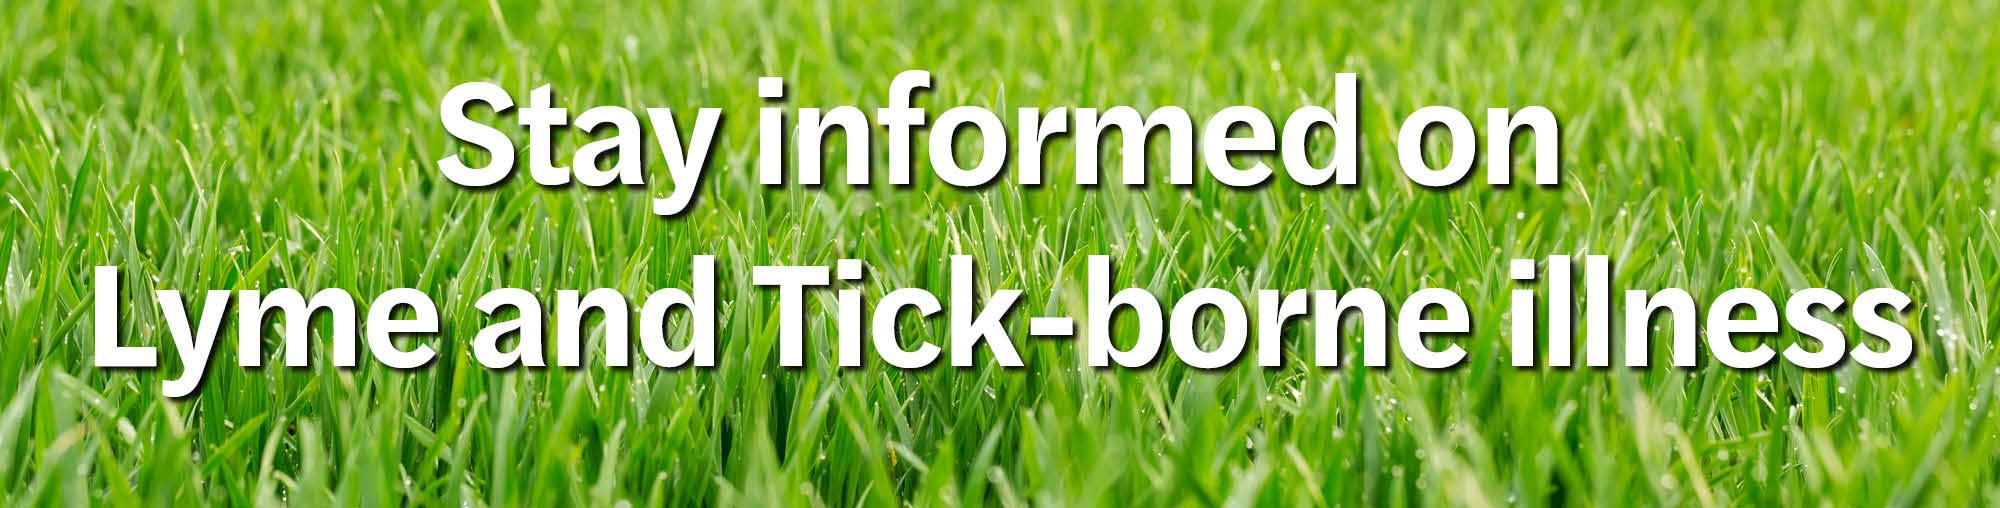 Stay informed on Lyme and Tick-Borne Illness